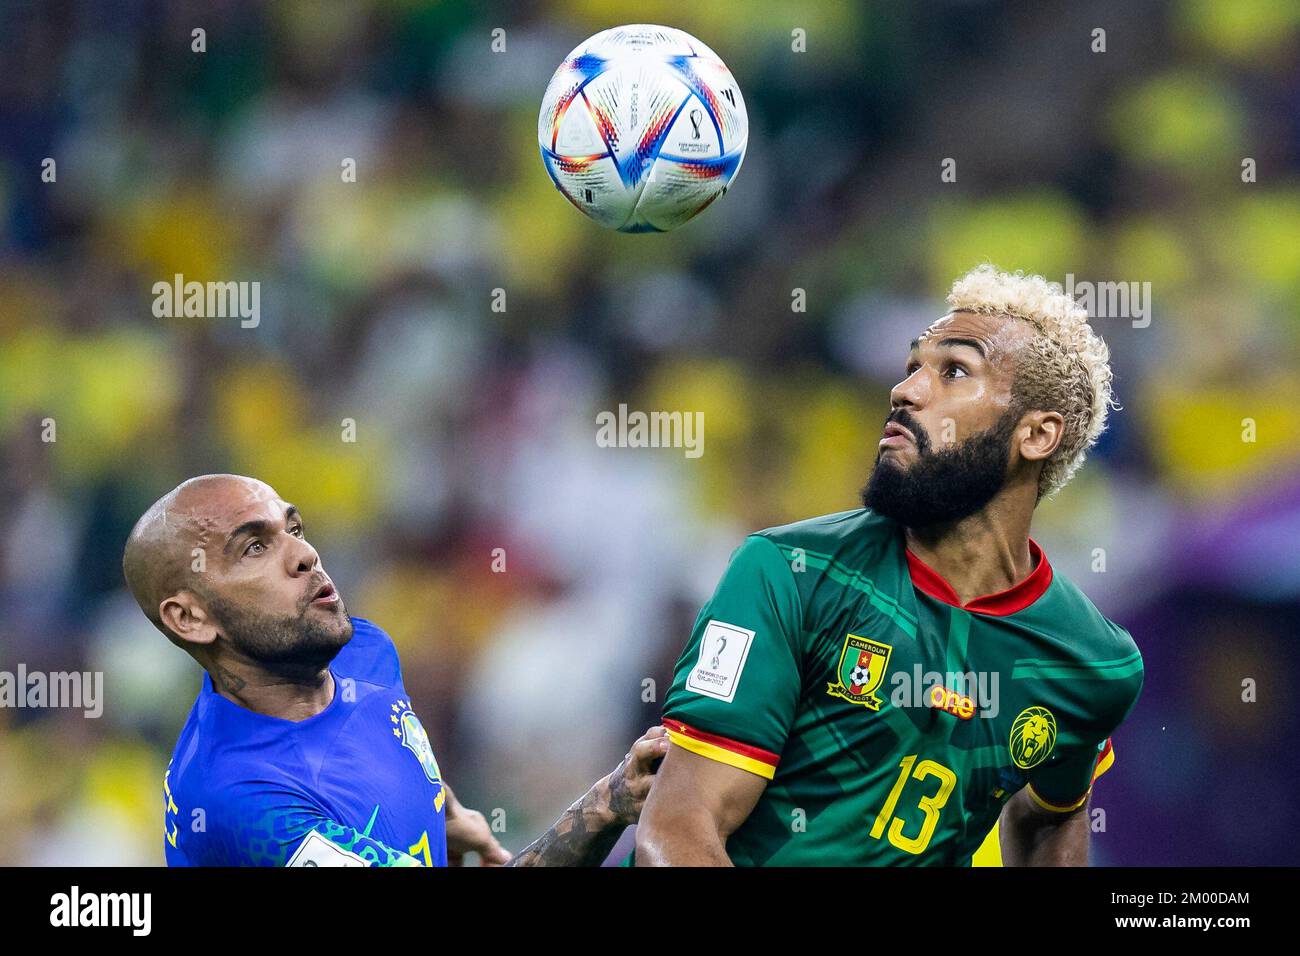 Lusail, Qatar. 02nd Dec, 2022. Soccer: World Cup, Cameroon - Brazil, preliminary round, Group G, Matchday 3, Lusail Stadium, Brazil's Dani Alves (l) in action against Cameroon's Eric Maxim Choupo-Moting (r). Credit: Tom Weller/dpa/Alamy Live News Stock Photo